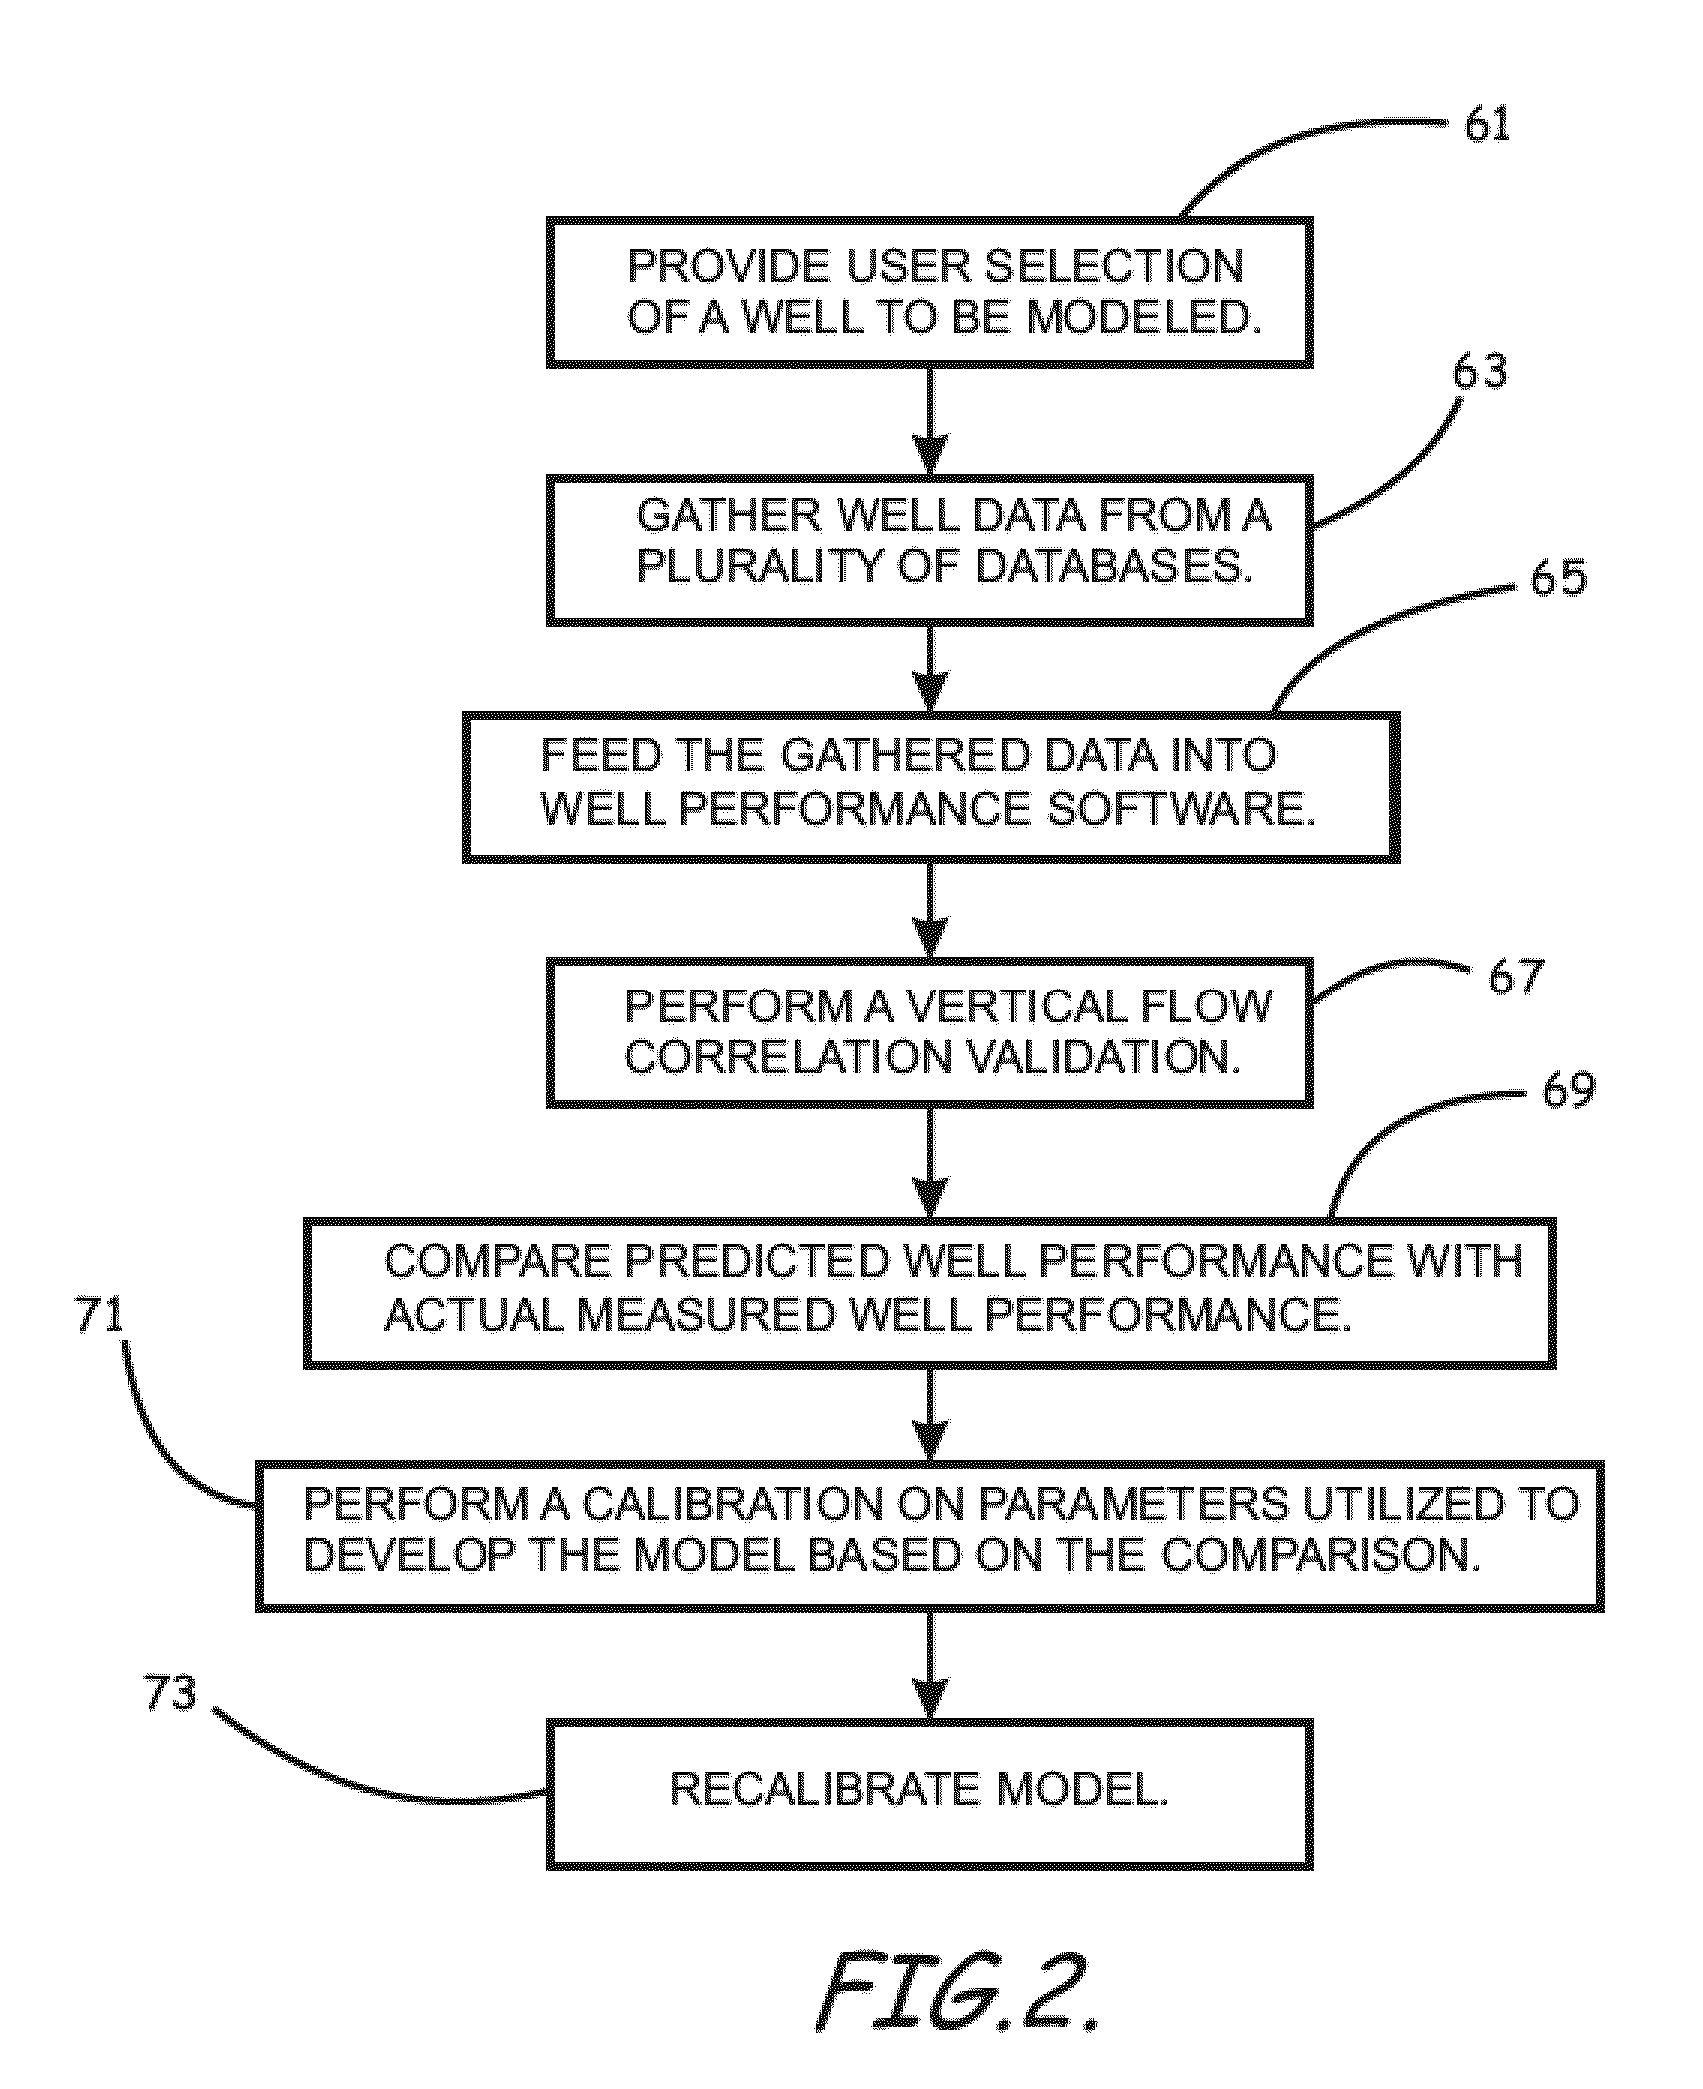 Methods for performing a fully automated workflow for well performance model creation and calibration